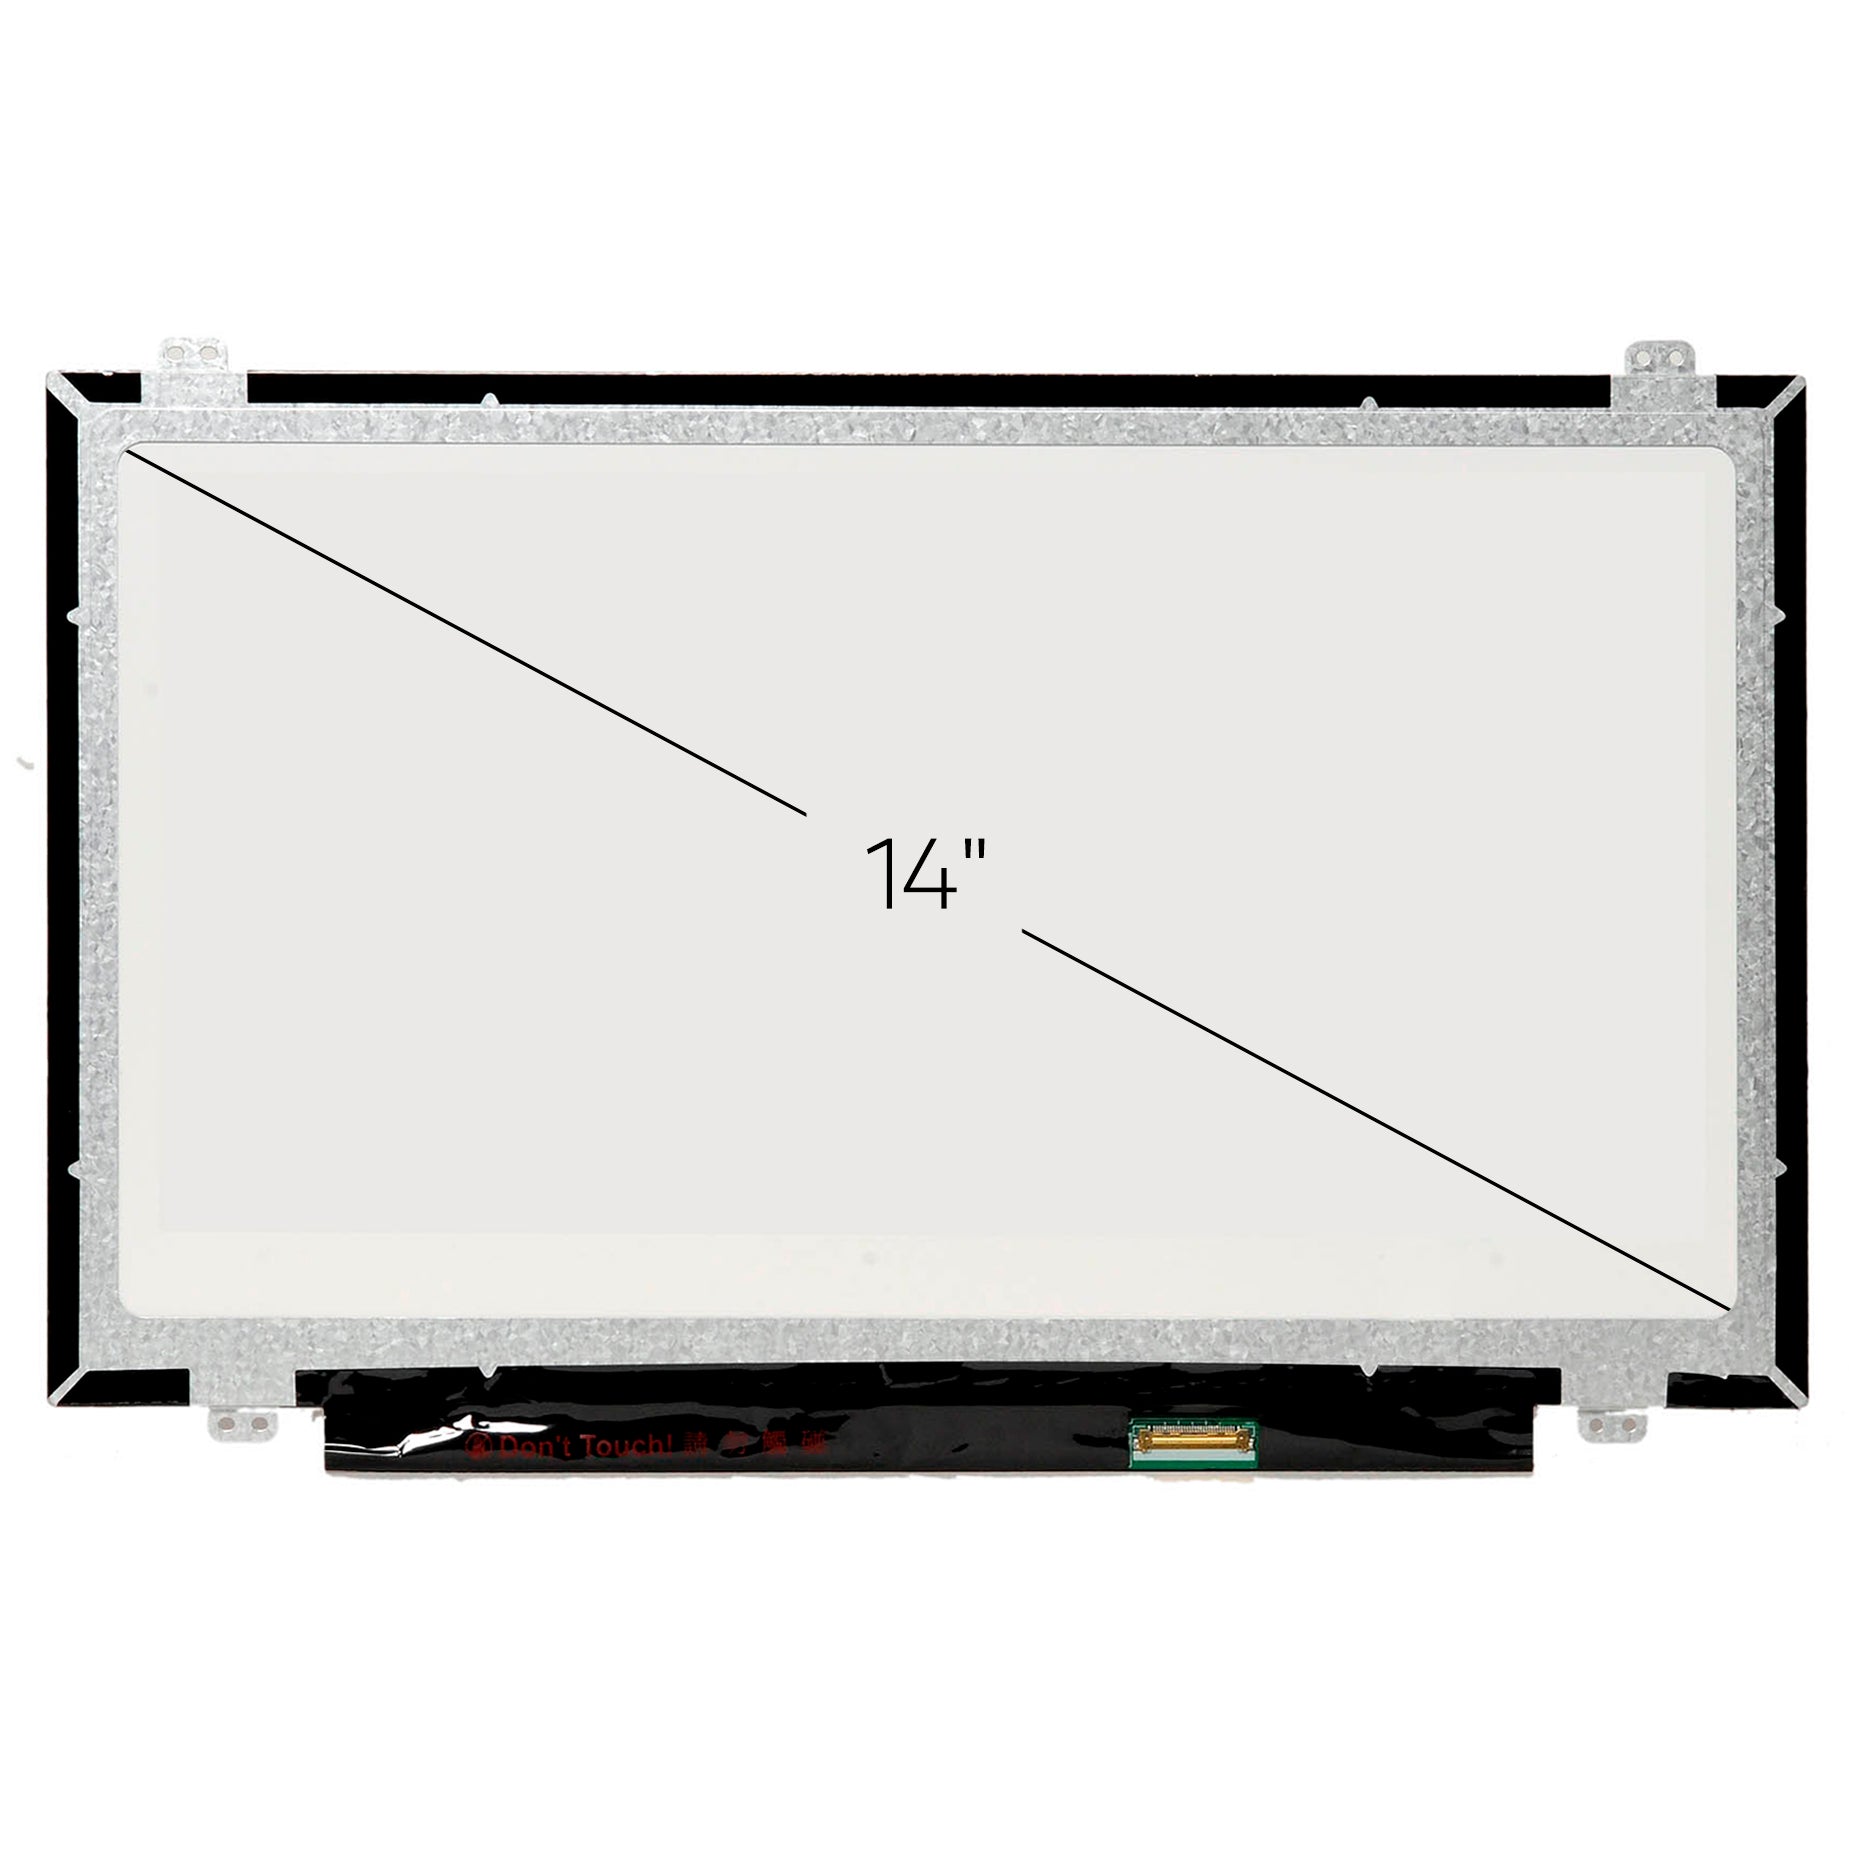 Screen Replacement for Dell P/N 6761Y DP/N 06761Y HD 1366x768 Glossy LCD LED Display